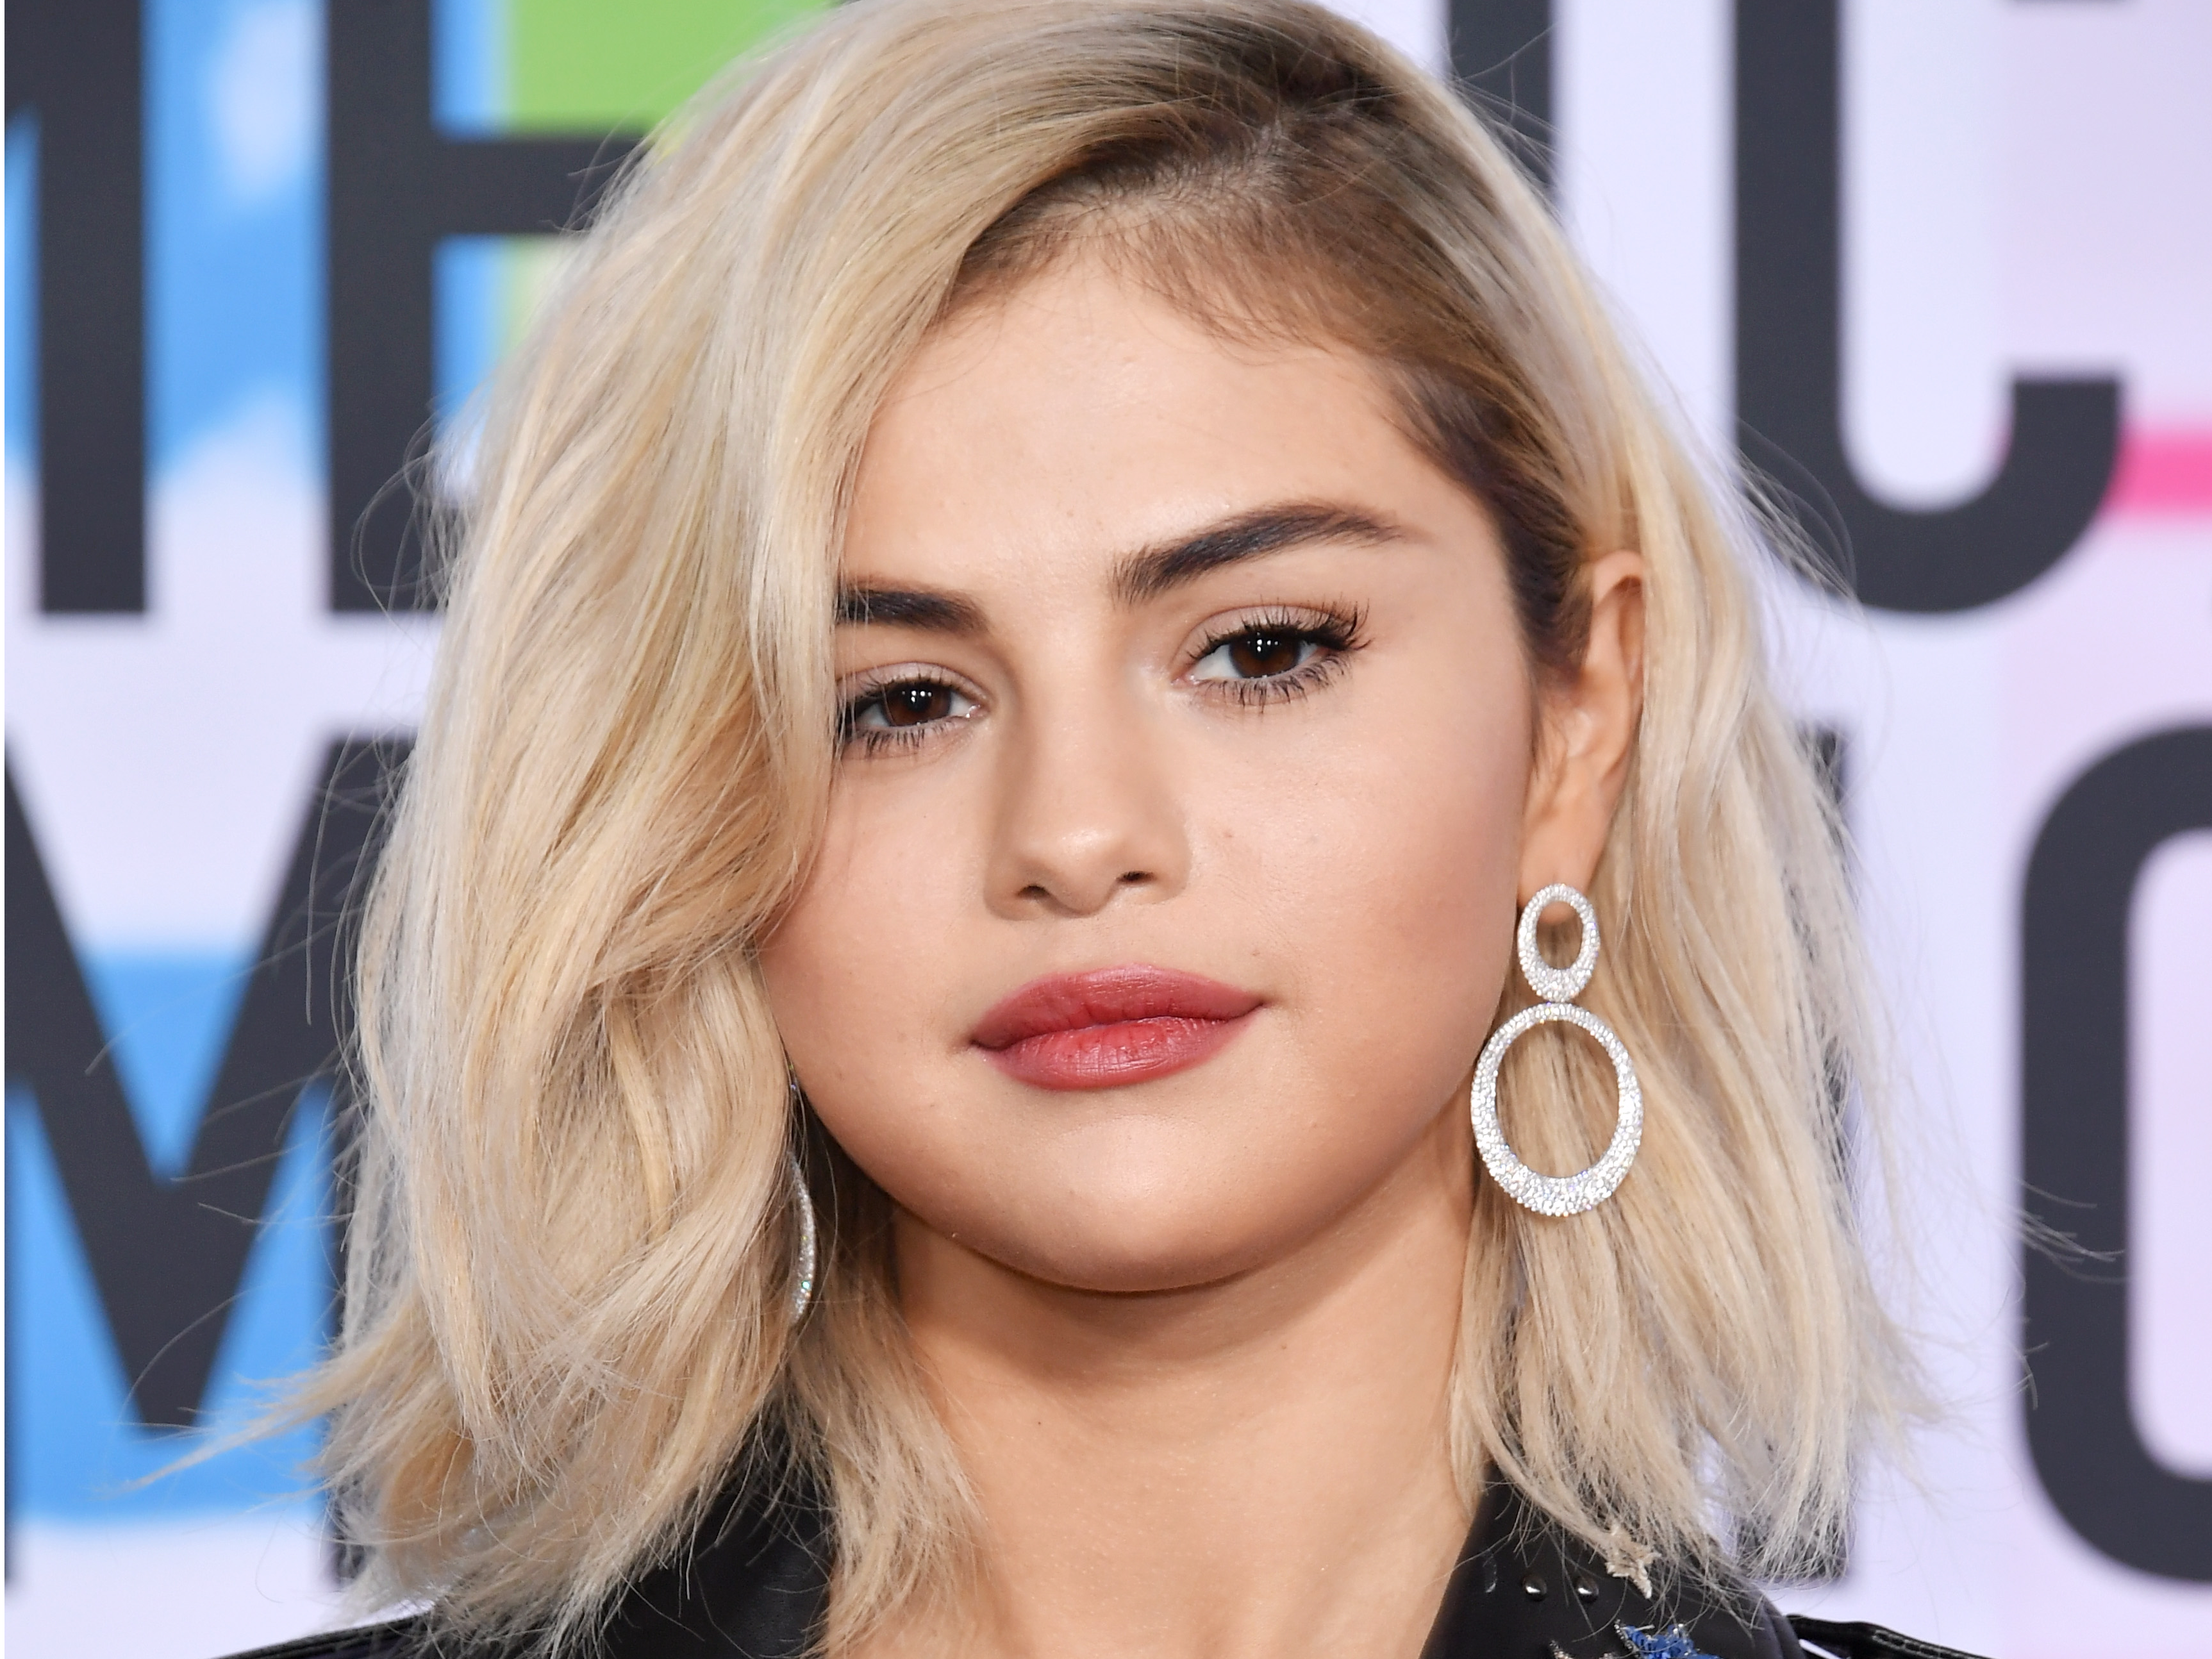 Selena Gomez just went blonde for American Music Awards - Business ...